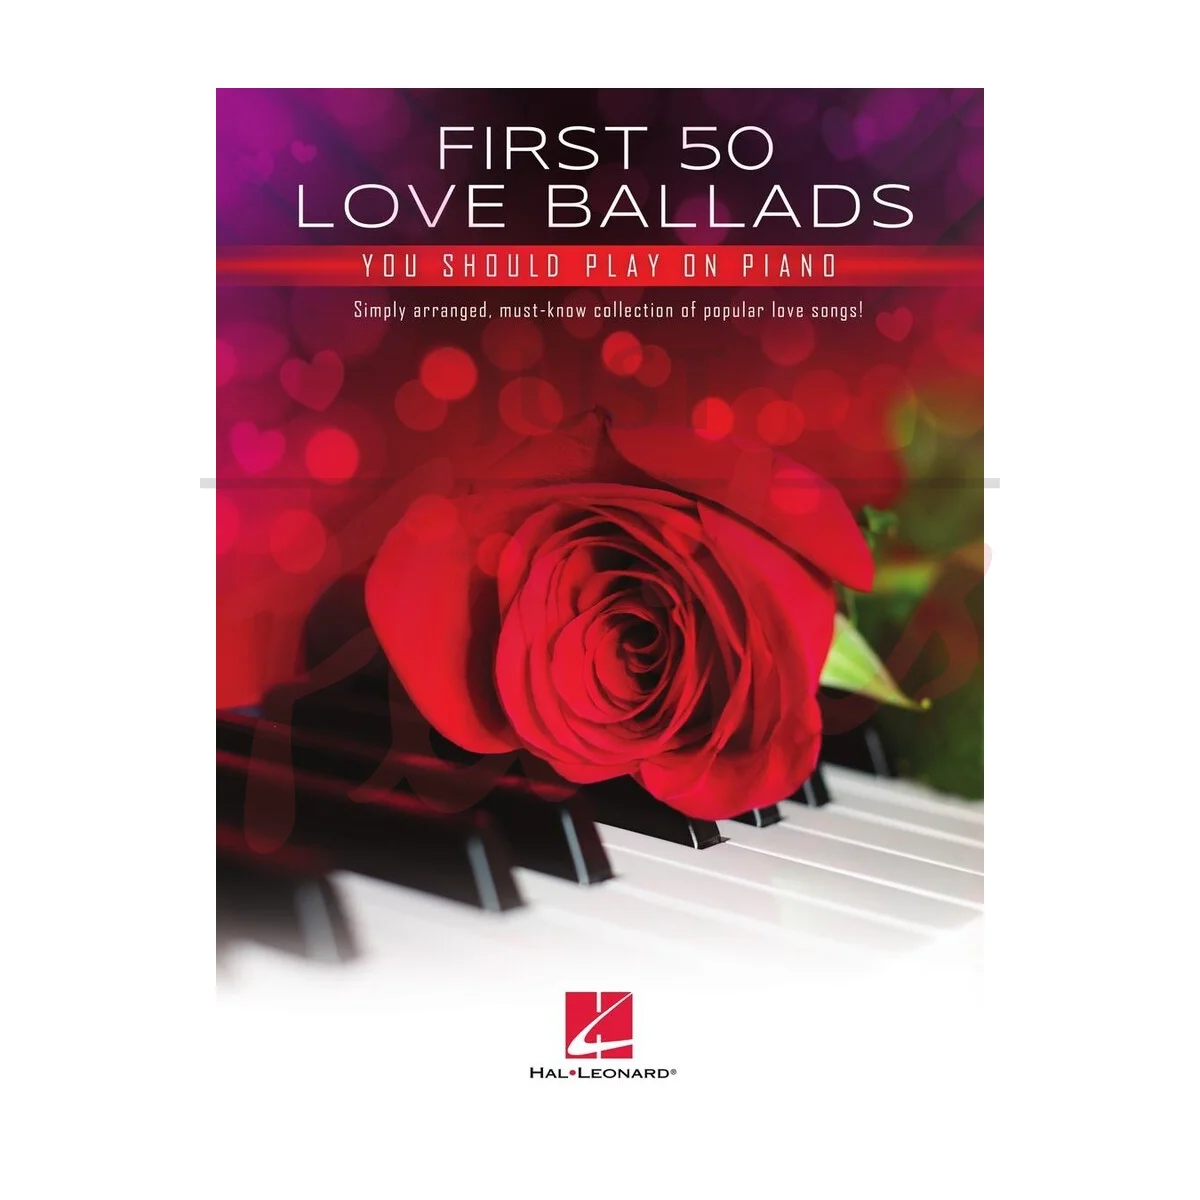 First 50 Love Ballads You Should Play on Piano